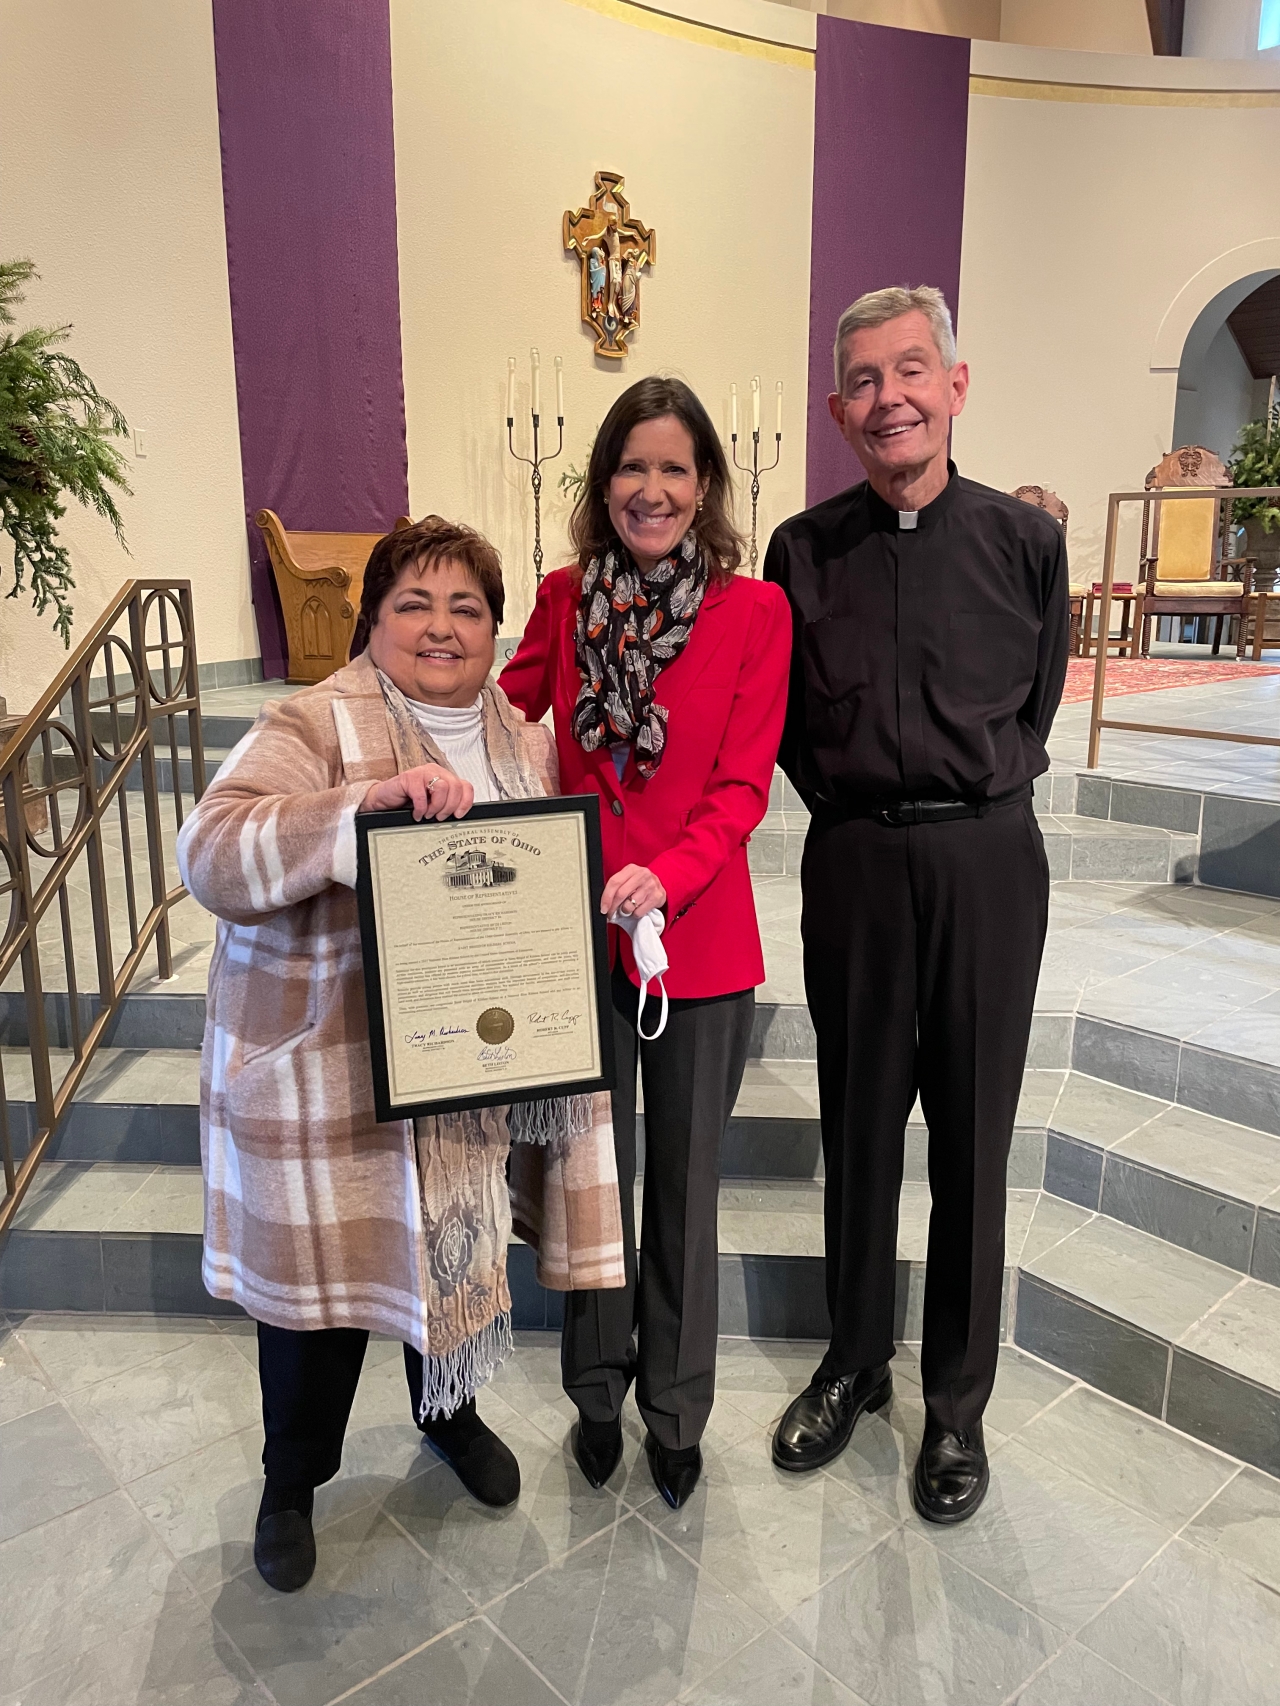 Representative Richardson presents Cathy O'Reilly, the Principle of Saint Brigid of Killdare School with a commendation recognizing their designation as a National Blue Ribbon School.